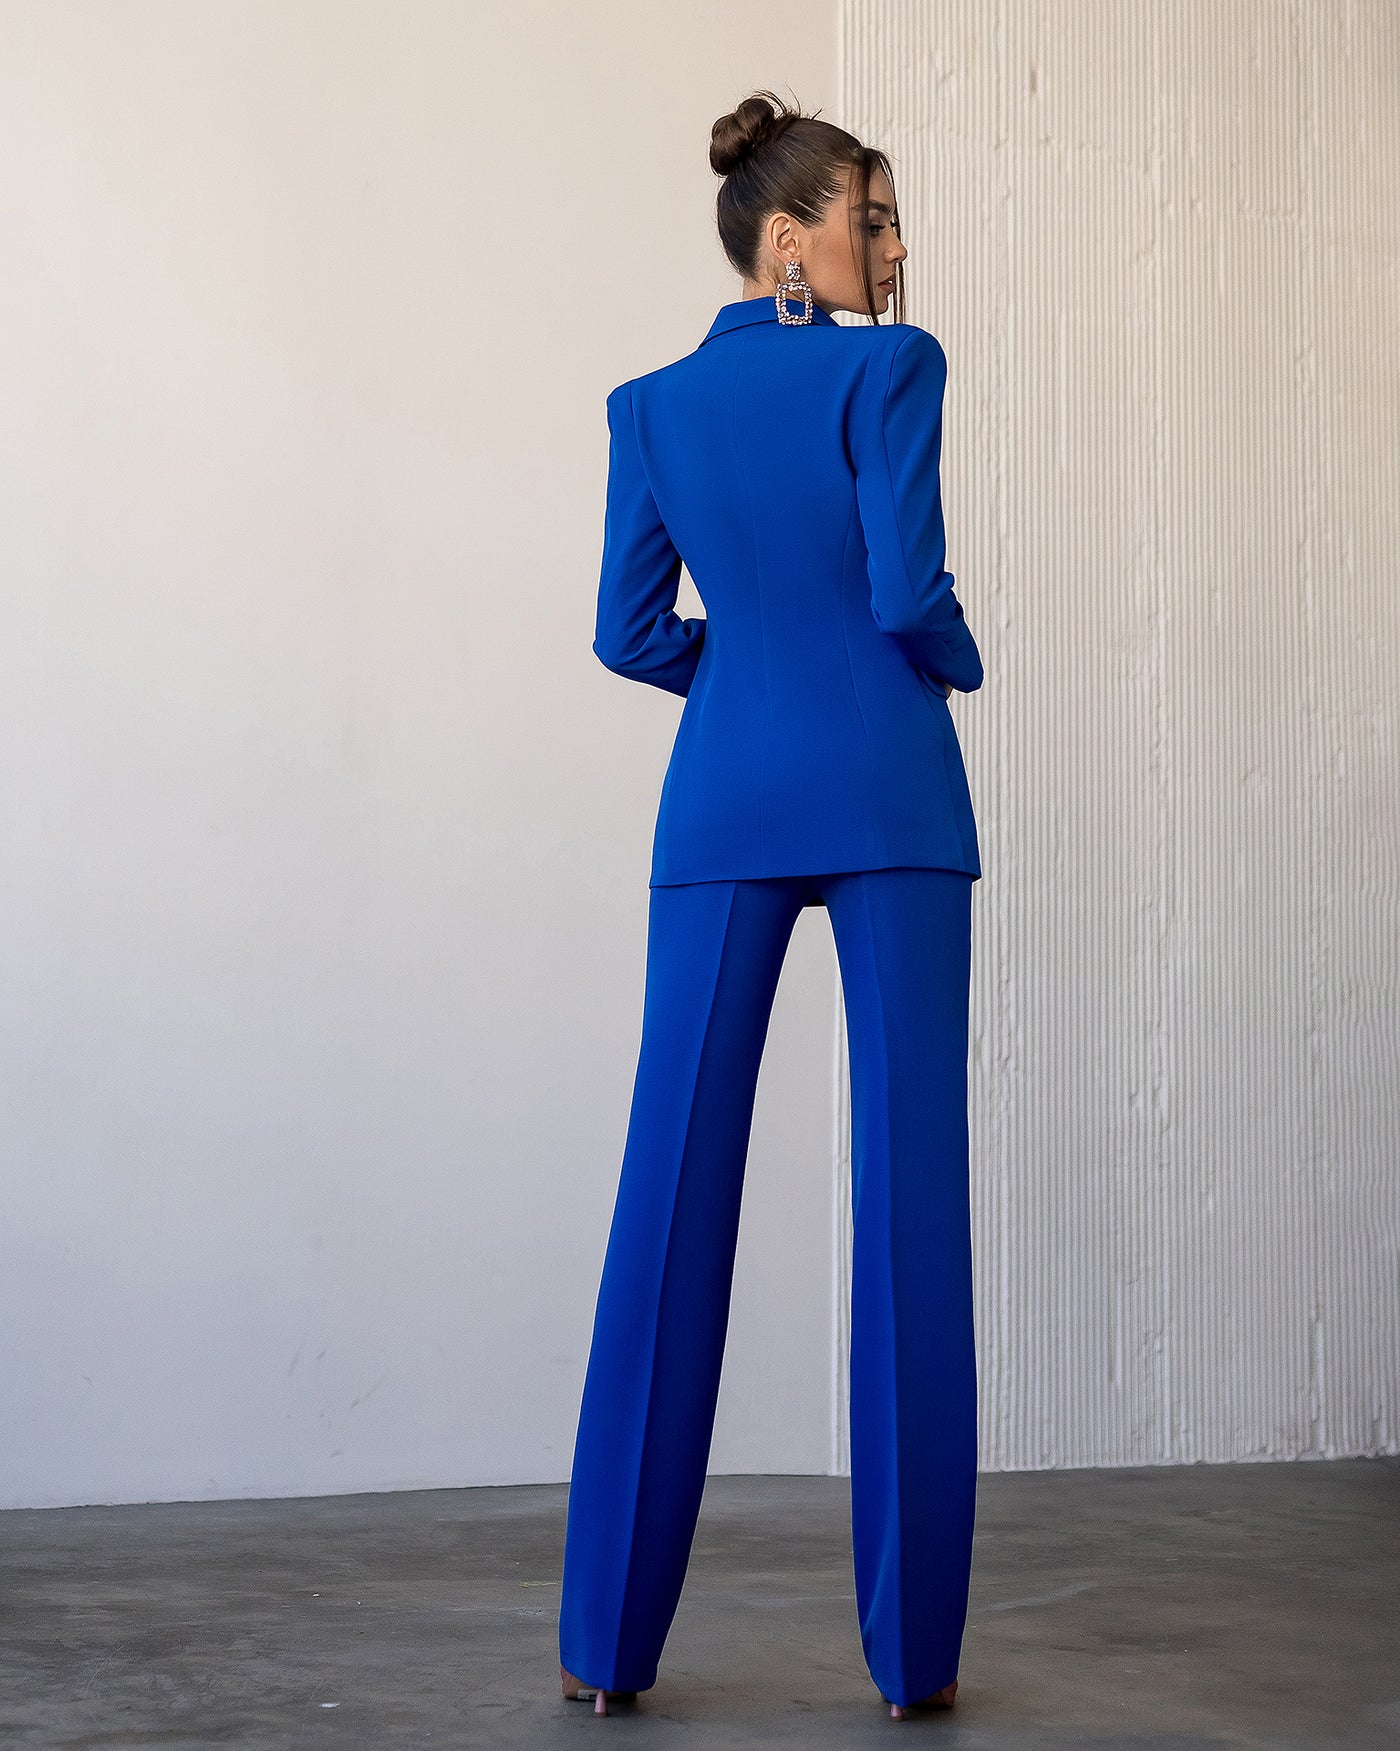 Blue SINGLE-BREASTED SUIT 2-PIECE (ARTICLE 354)